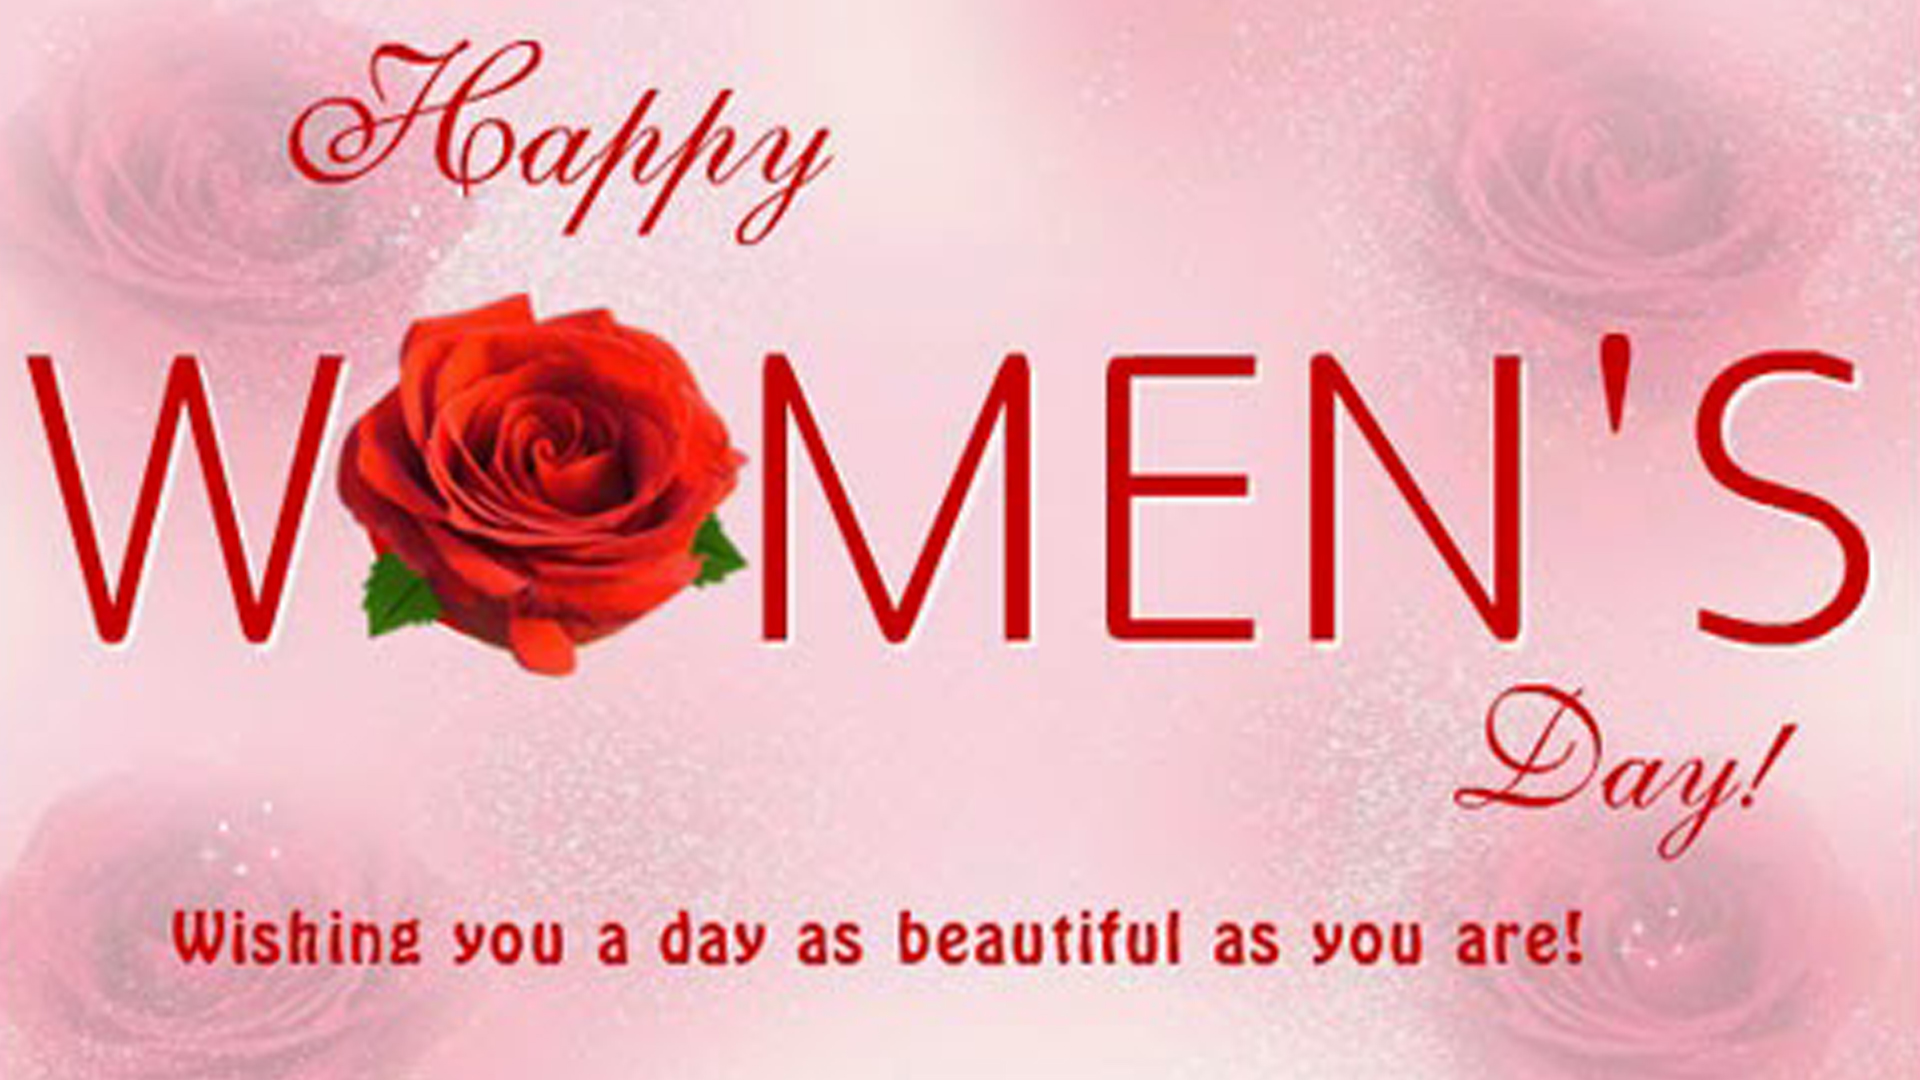 womens day card image 2018